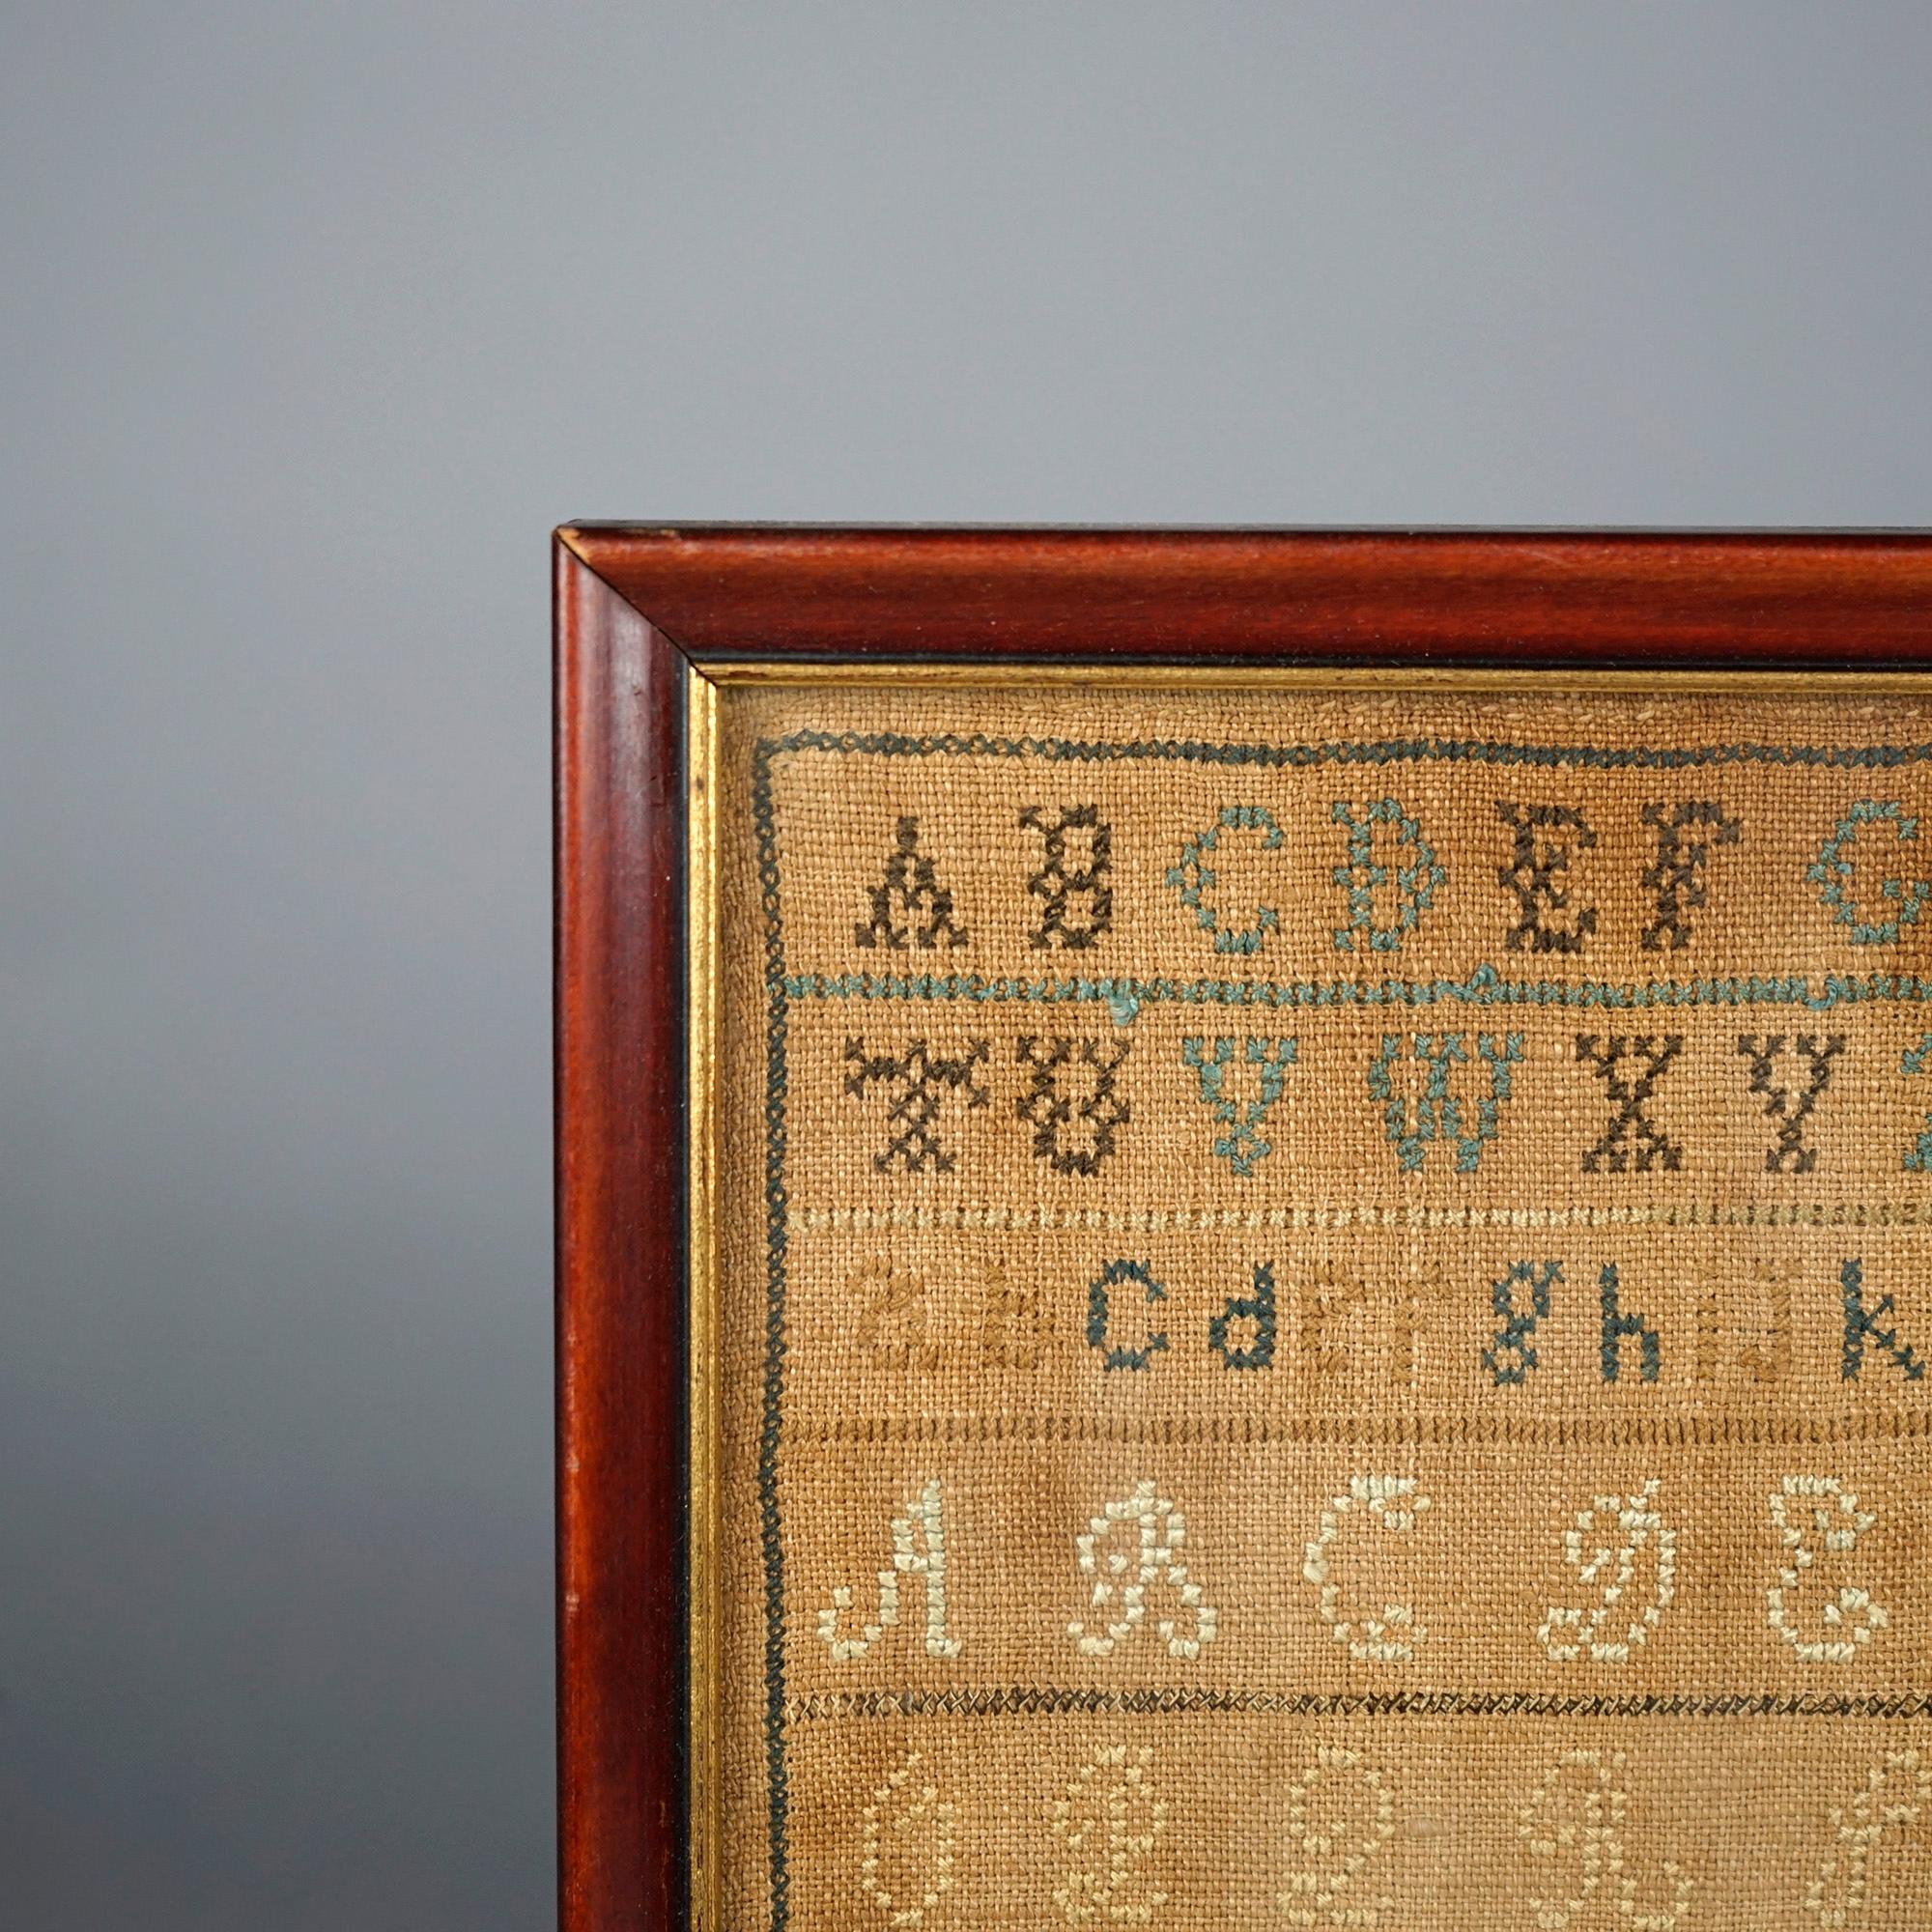 An antique ABC alphabet sampler offers hand crafted needlework alphabet on linen, lower right right dated 1830, mounted and framed.

Measures- 12'' H x 12'' W x .5'' D.

Catalogue Note: Ask about DISCOUNTED DELIVERY RATES available to most regions